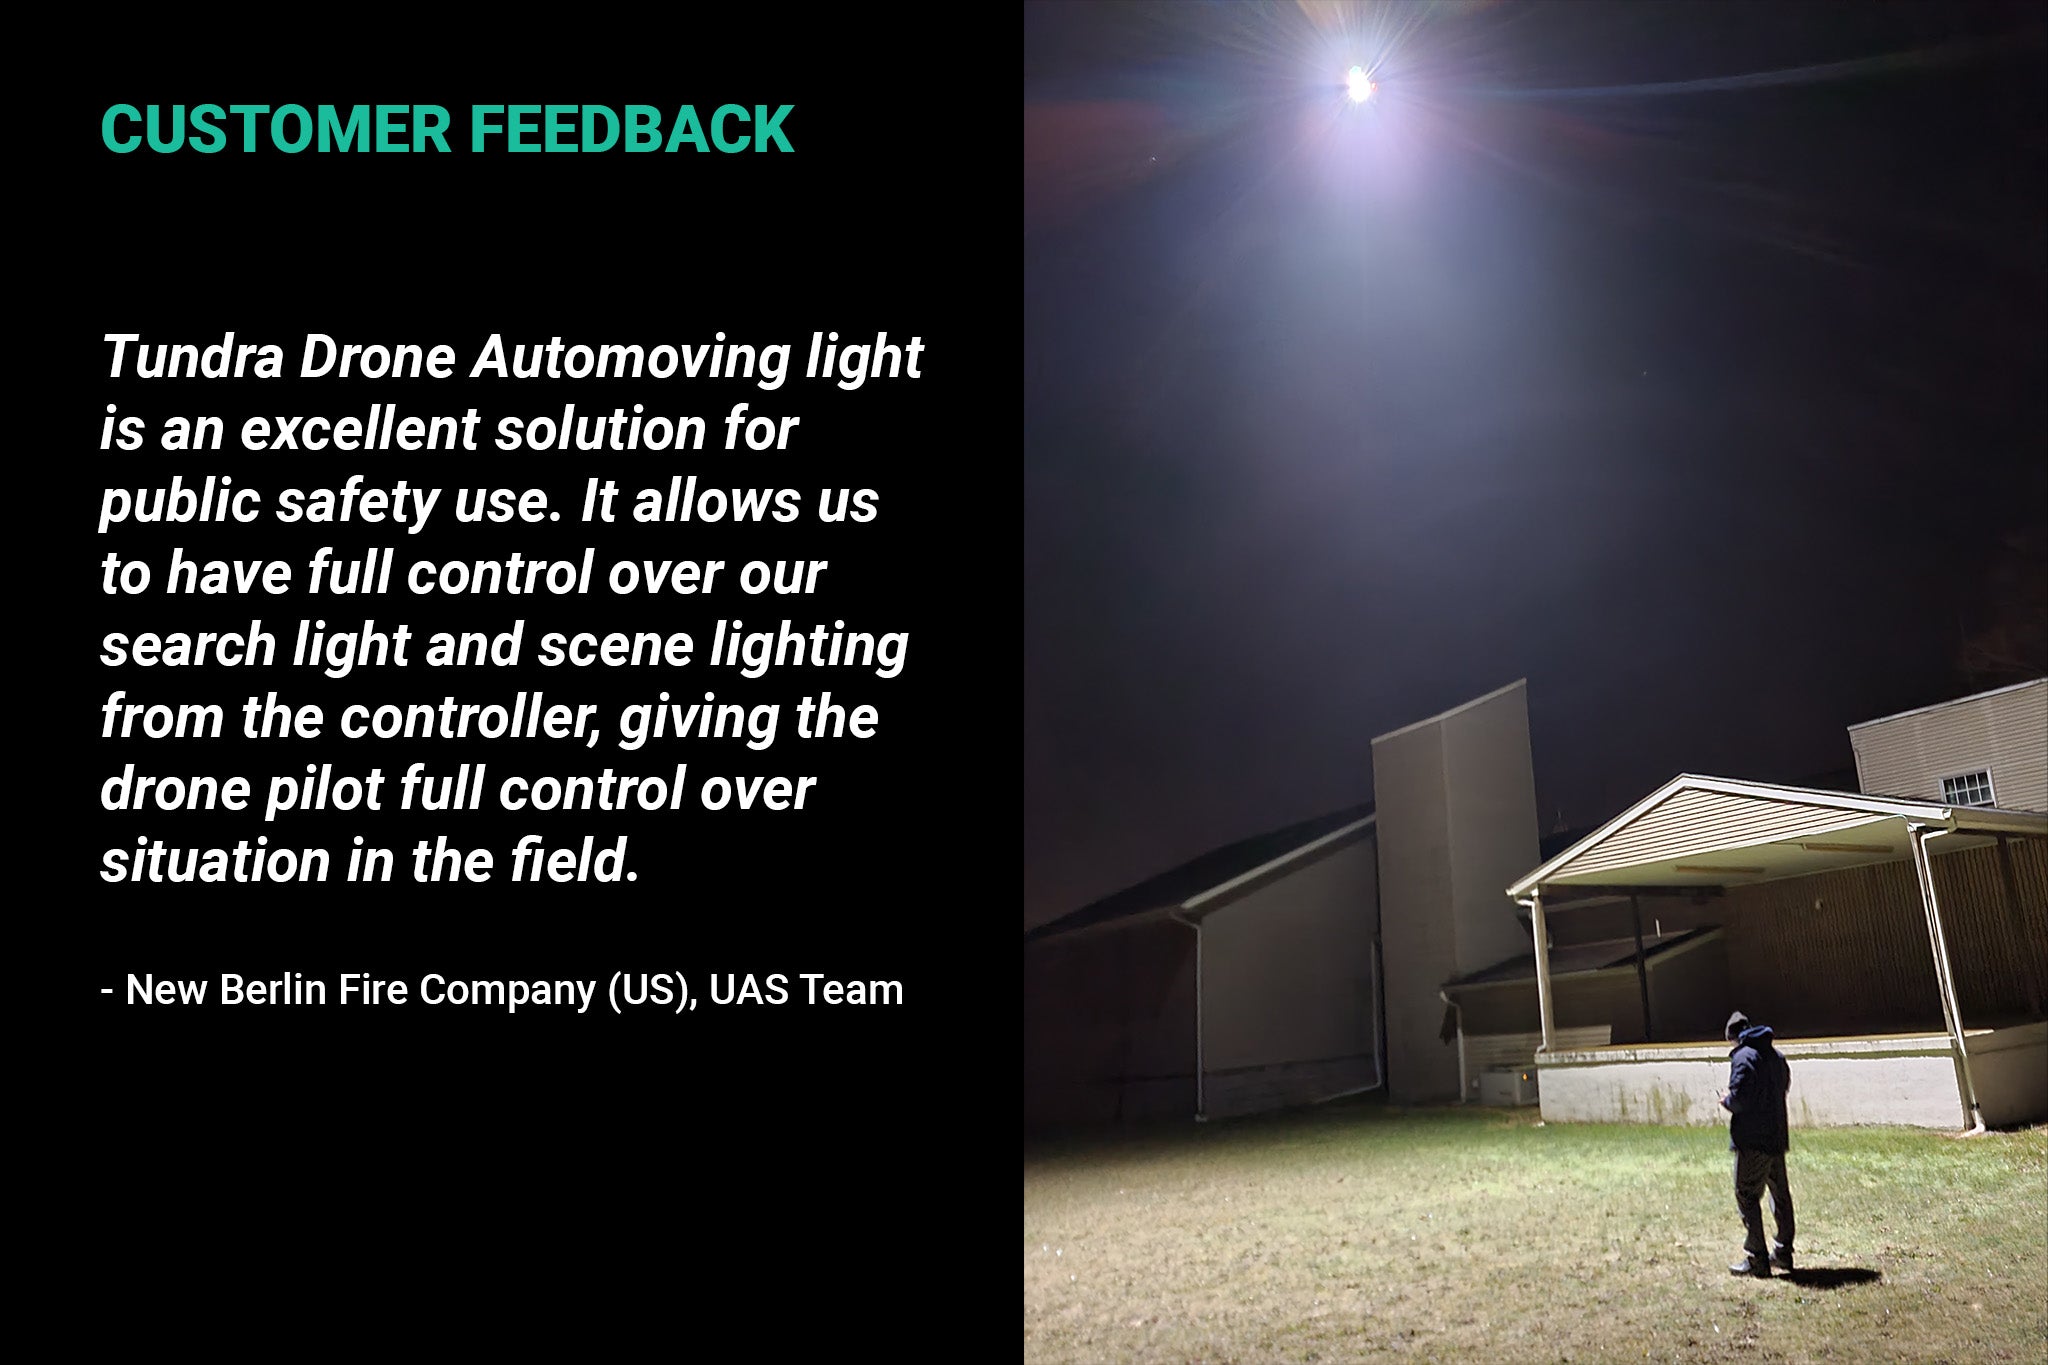 The Tundra Drone Automoving light is an excellent solution for public safety use. It allows us to have full control over our searchlight and scene lighting from the controller, giving the drone pilot full control over the situation in the field. – New Berlin Fire Company (US), UAS Team